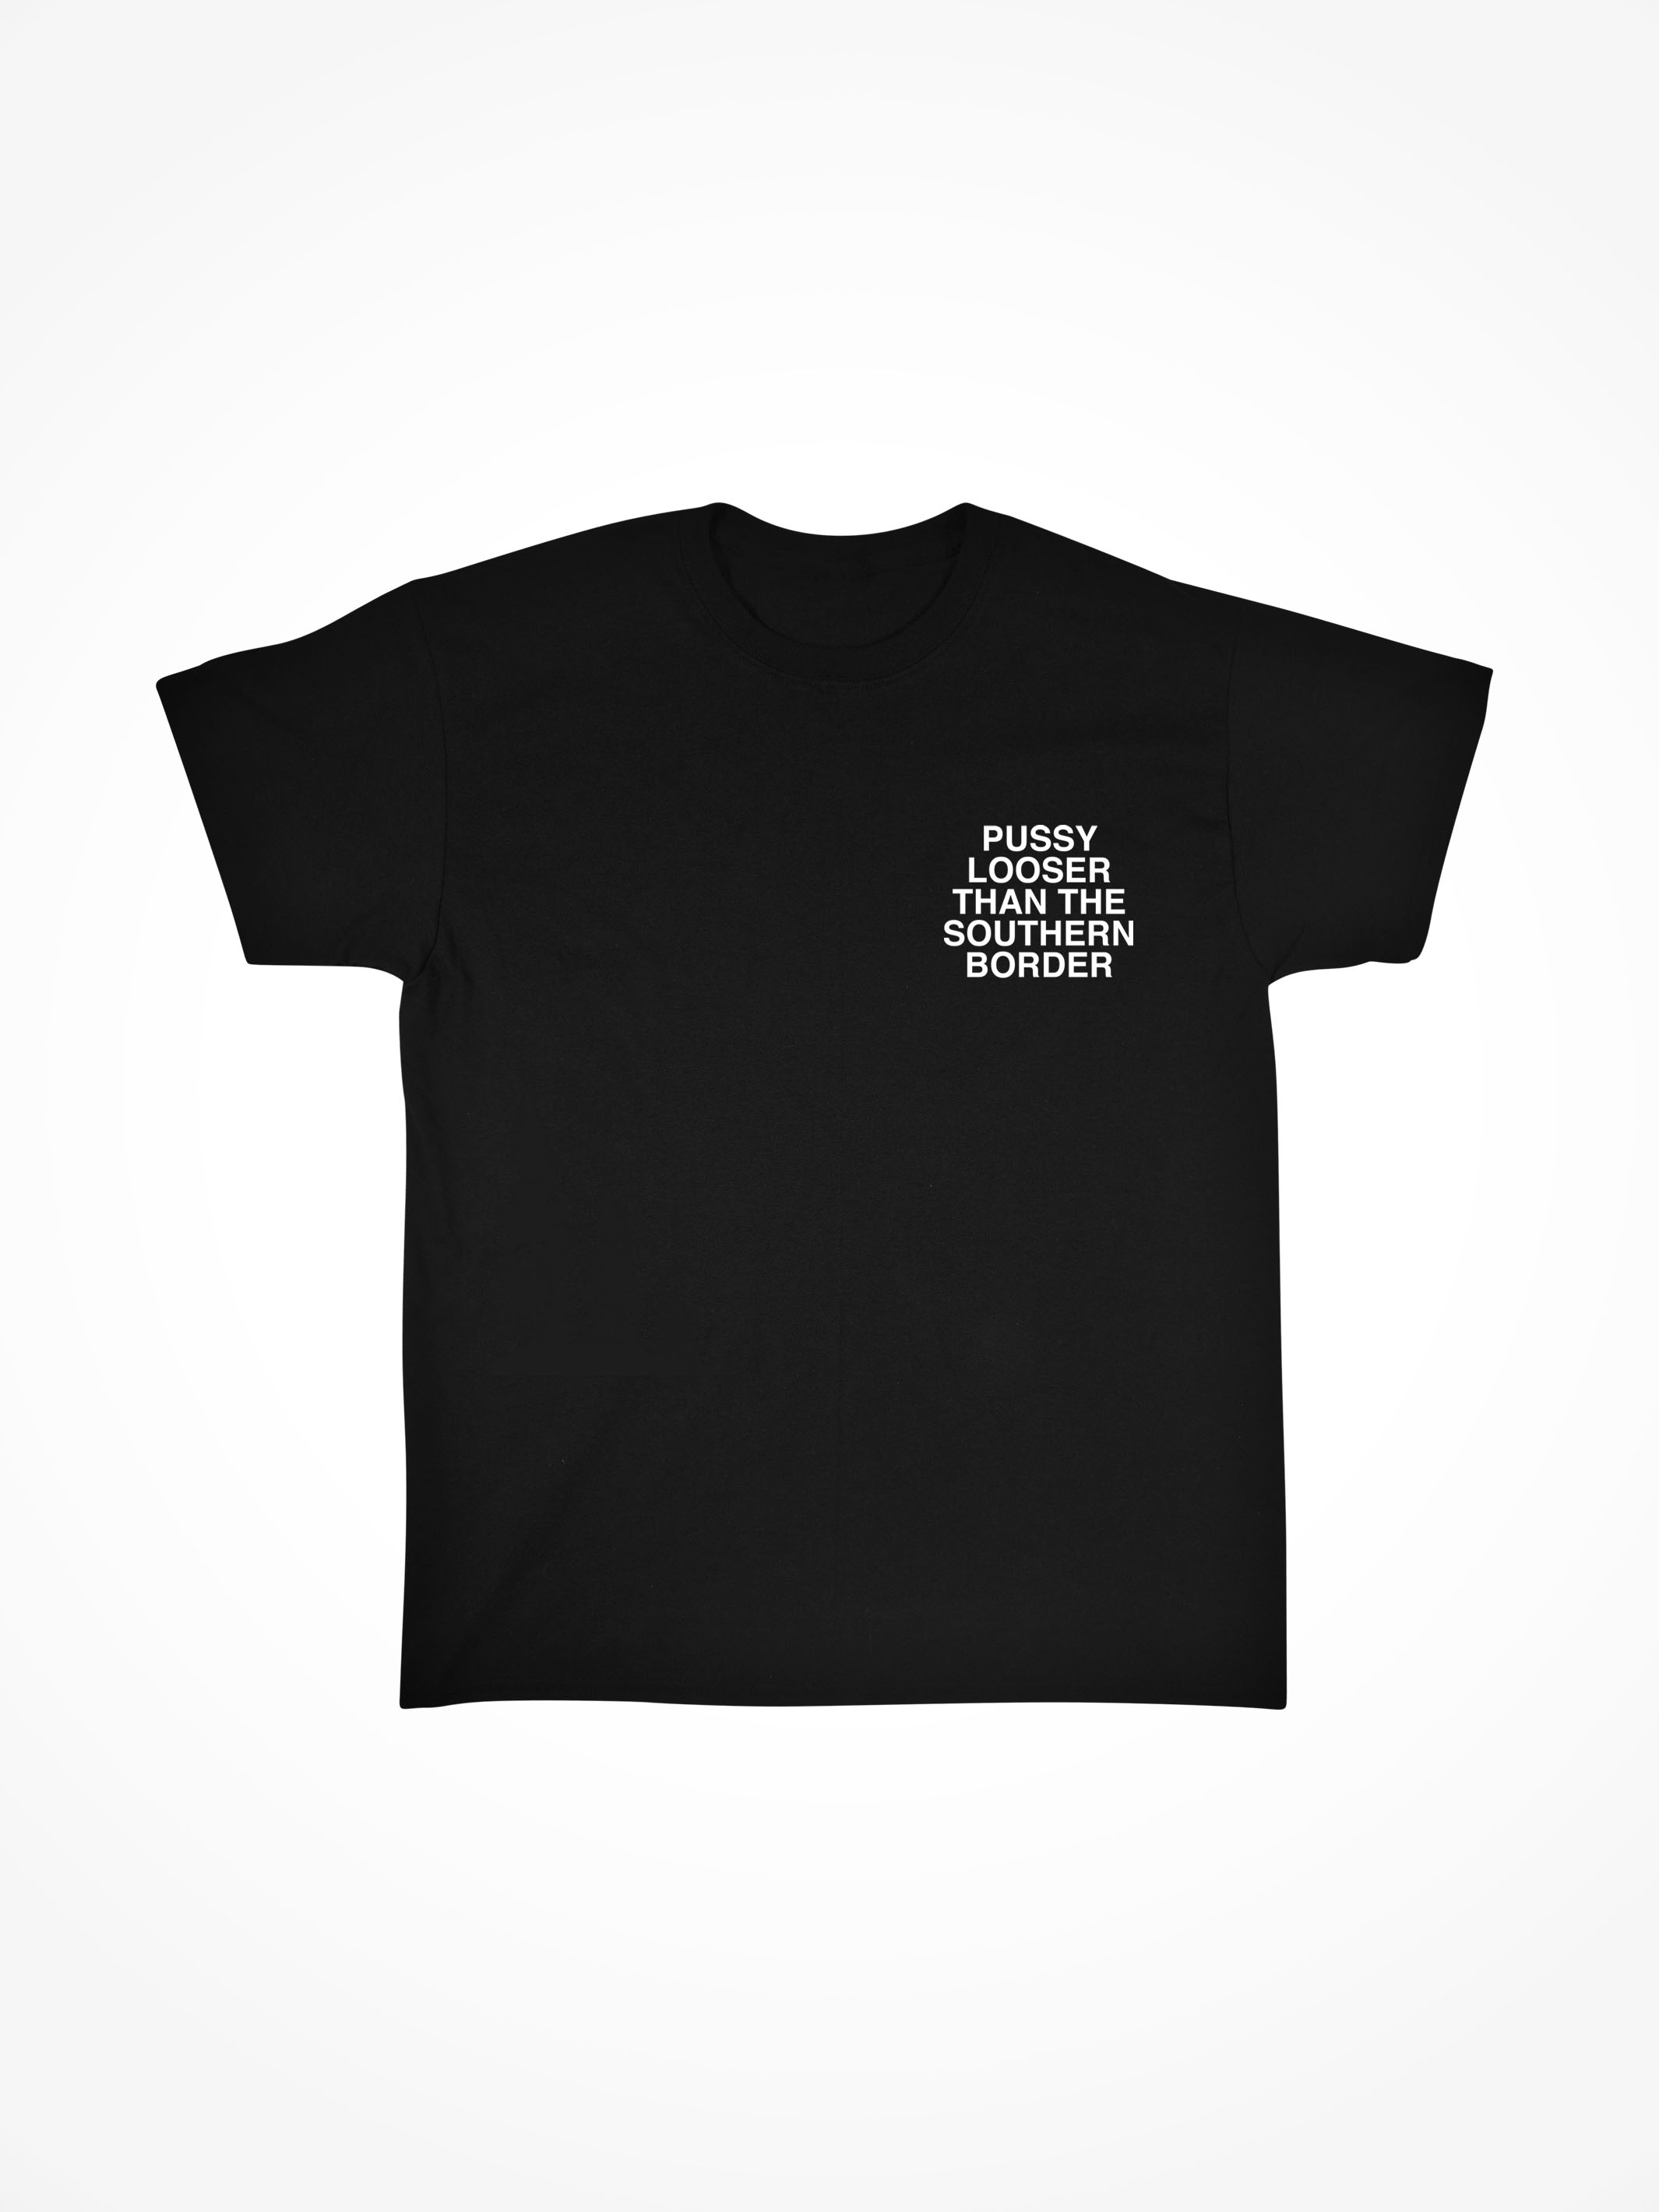 PUSSY LOOSER THAN THE SOUTHERN BORDER • Black Tee - LINDA FINEGOLD